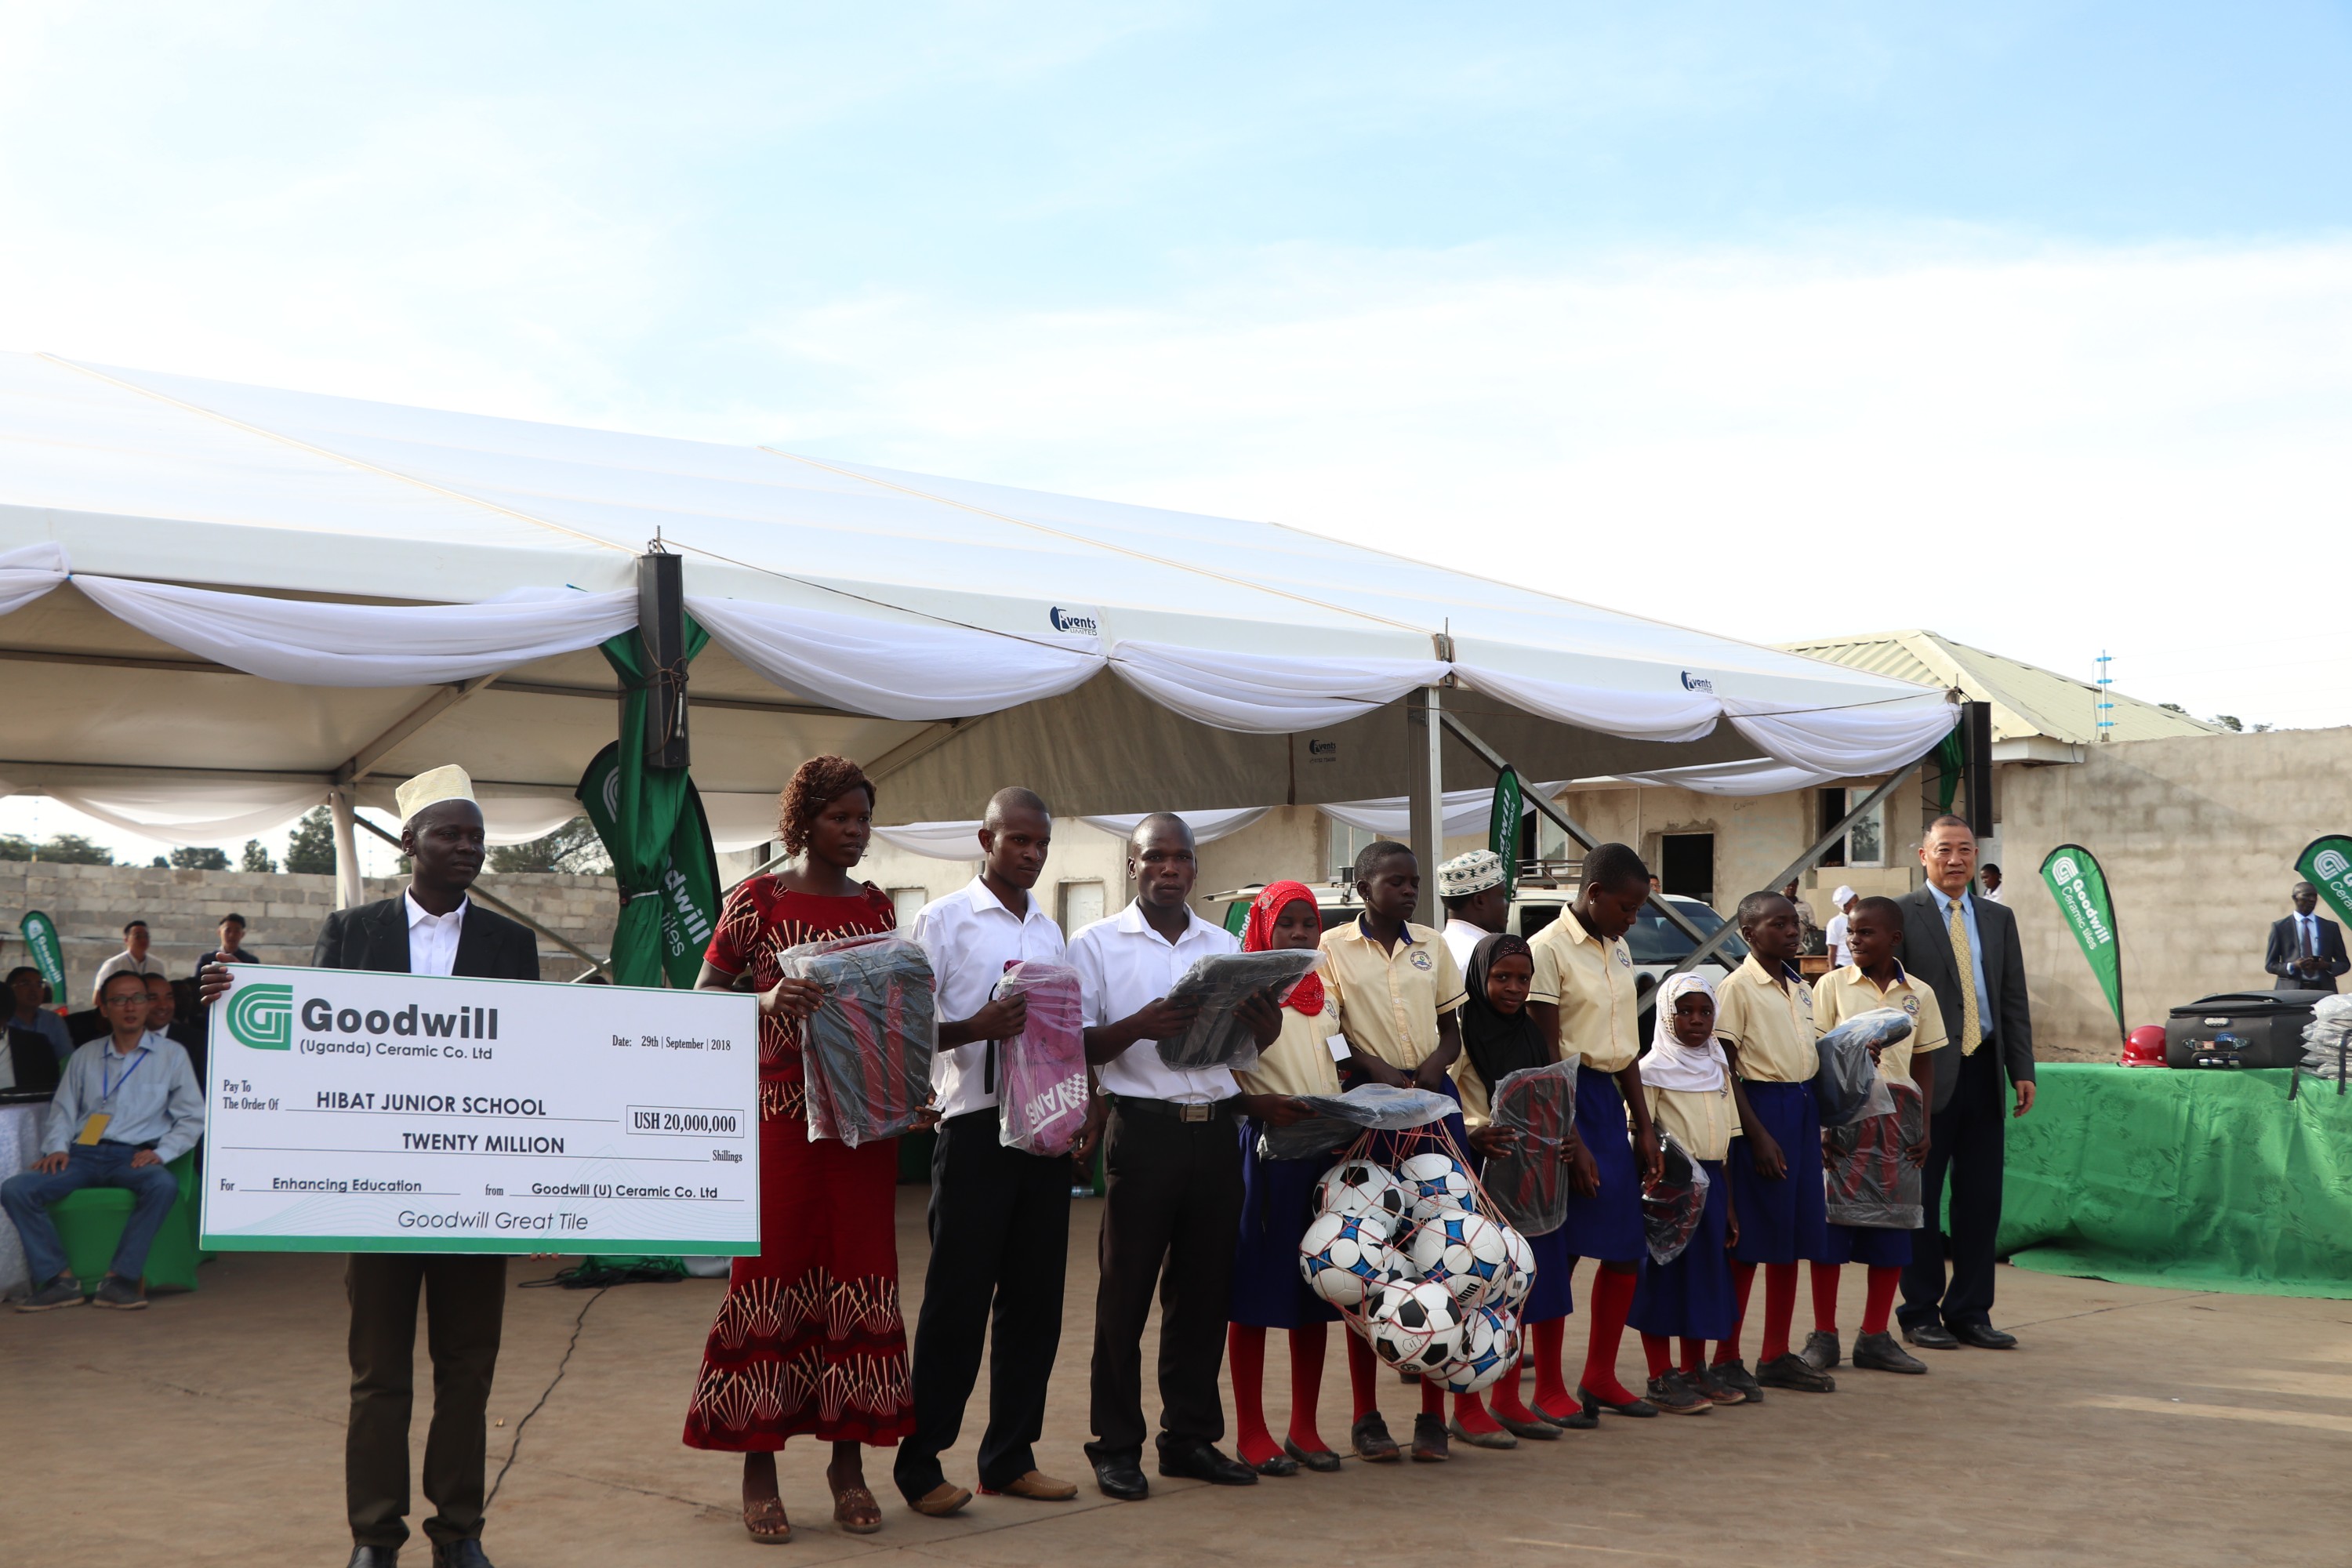 Wangkang (Uganda) Ceramics Co., Ltd donates  educational funds and teaching facilities and new school uniforms to the local primary school of the Bekaa